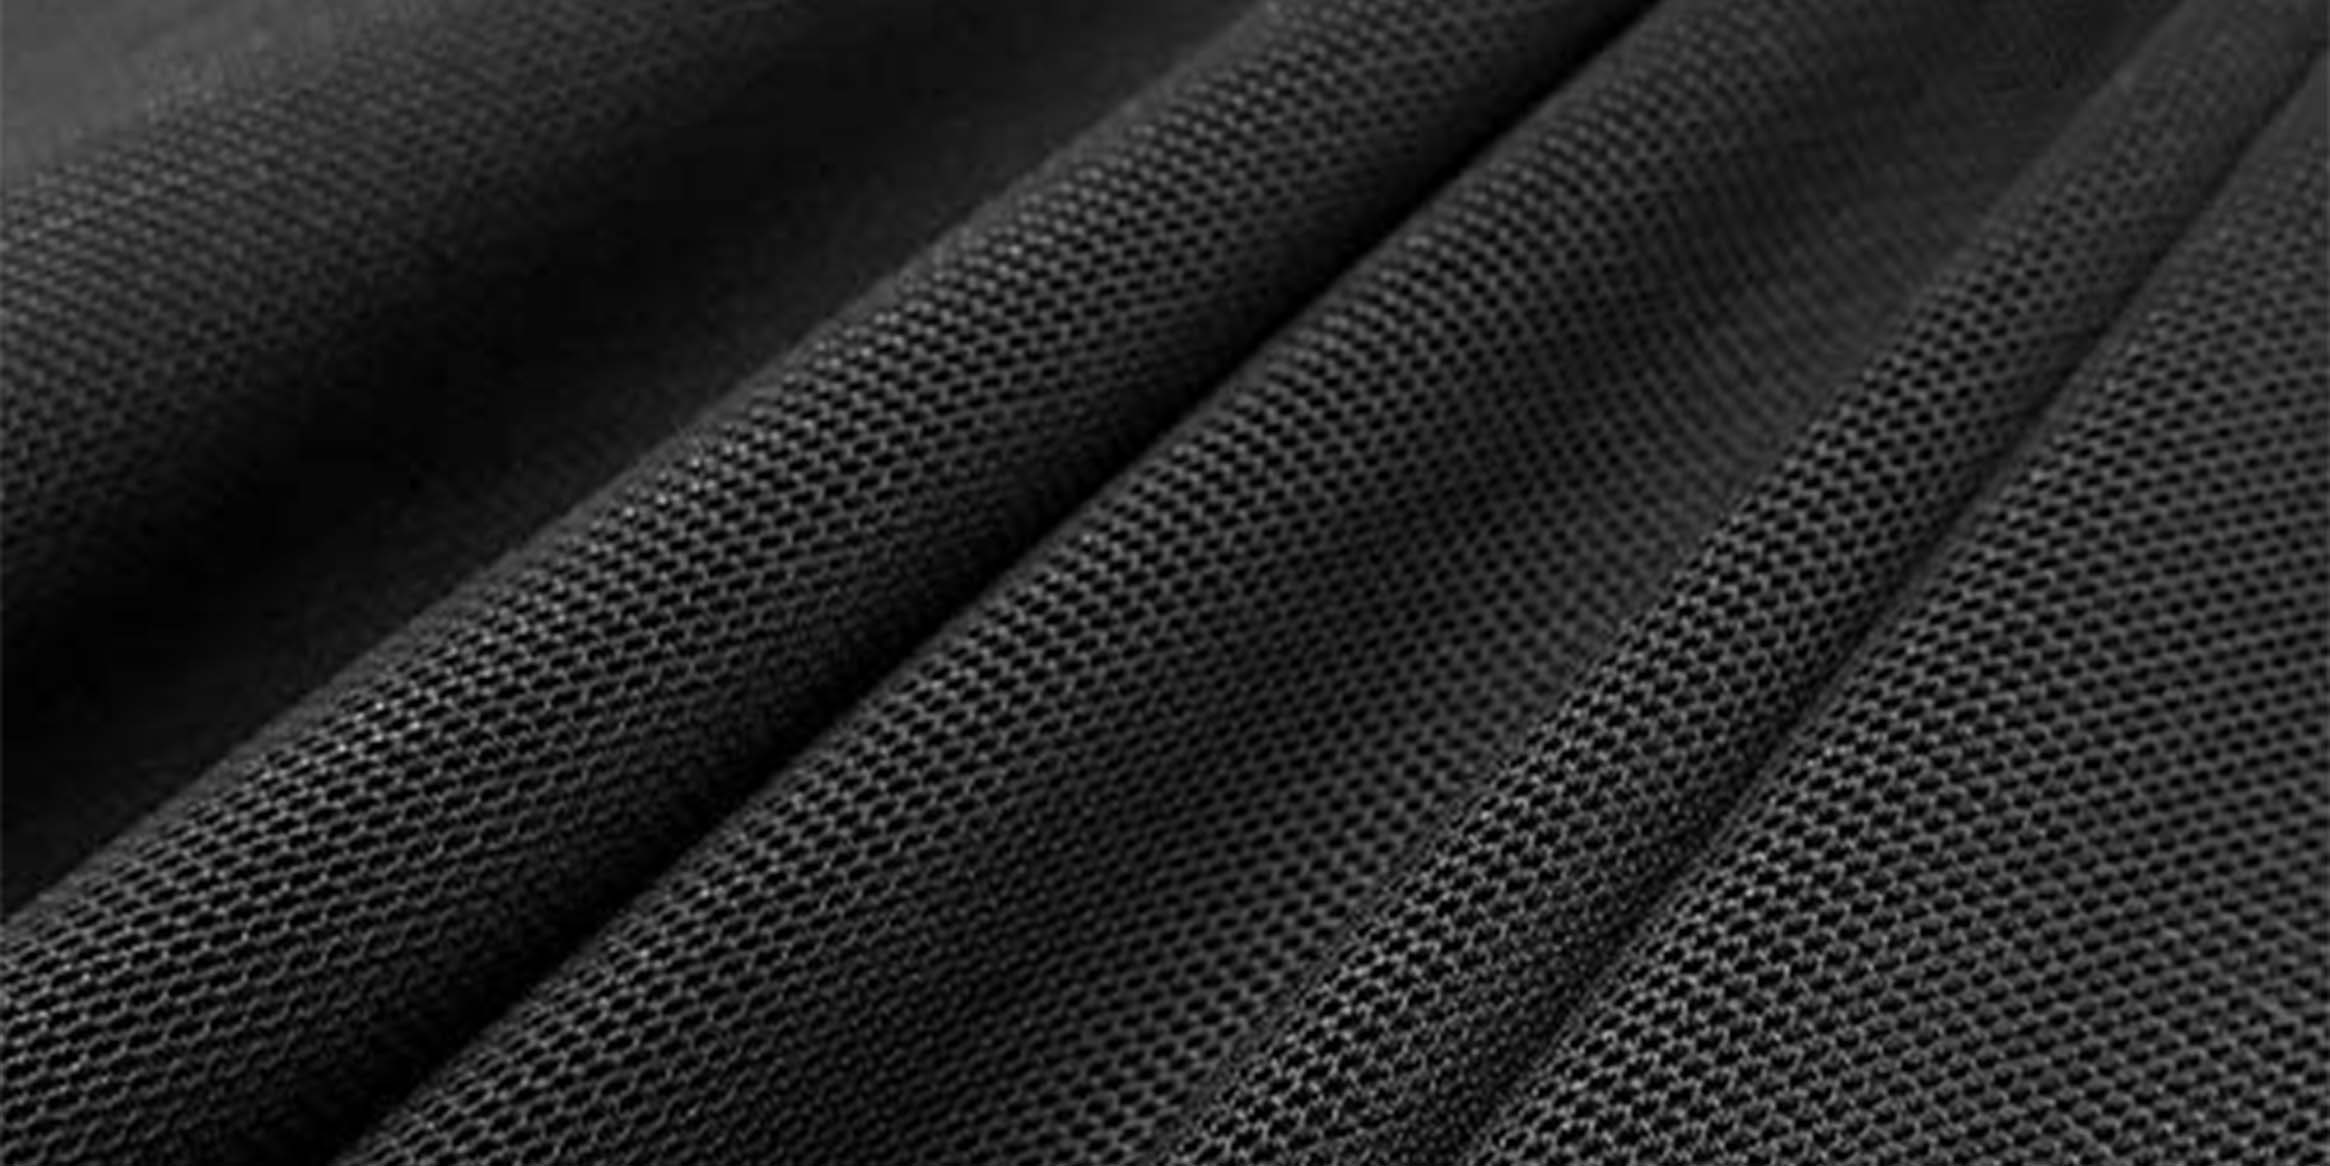 Mesh Fabric - Buy Mesh Fabric by the Yard at Best Price